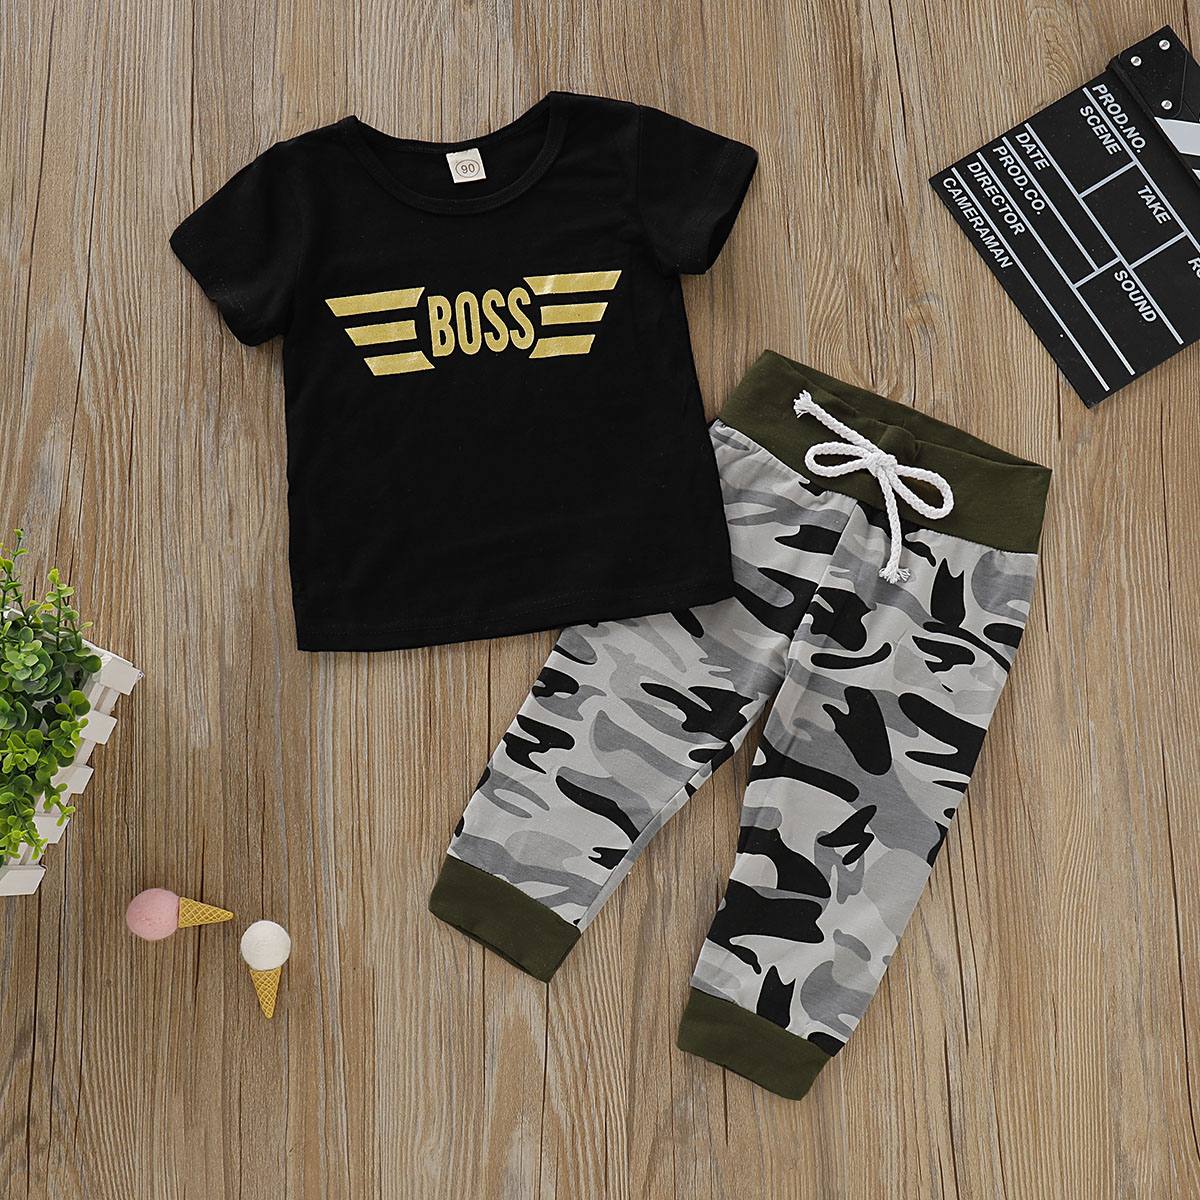 2-piece Toddler Boy's Letter Print Tee and Camouflage Pants Set